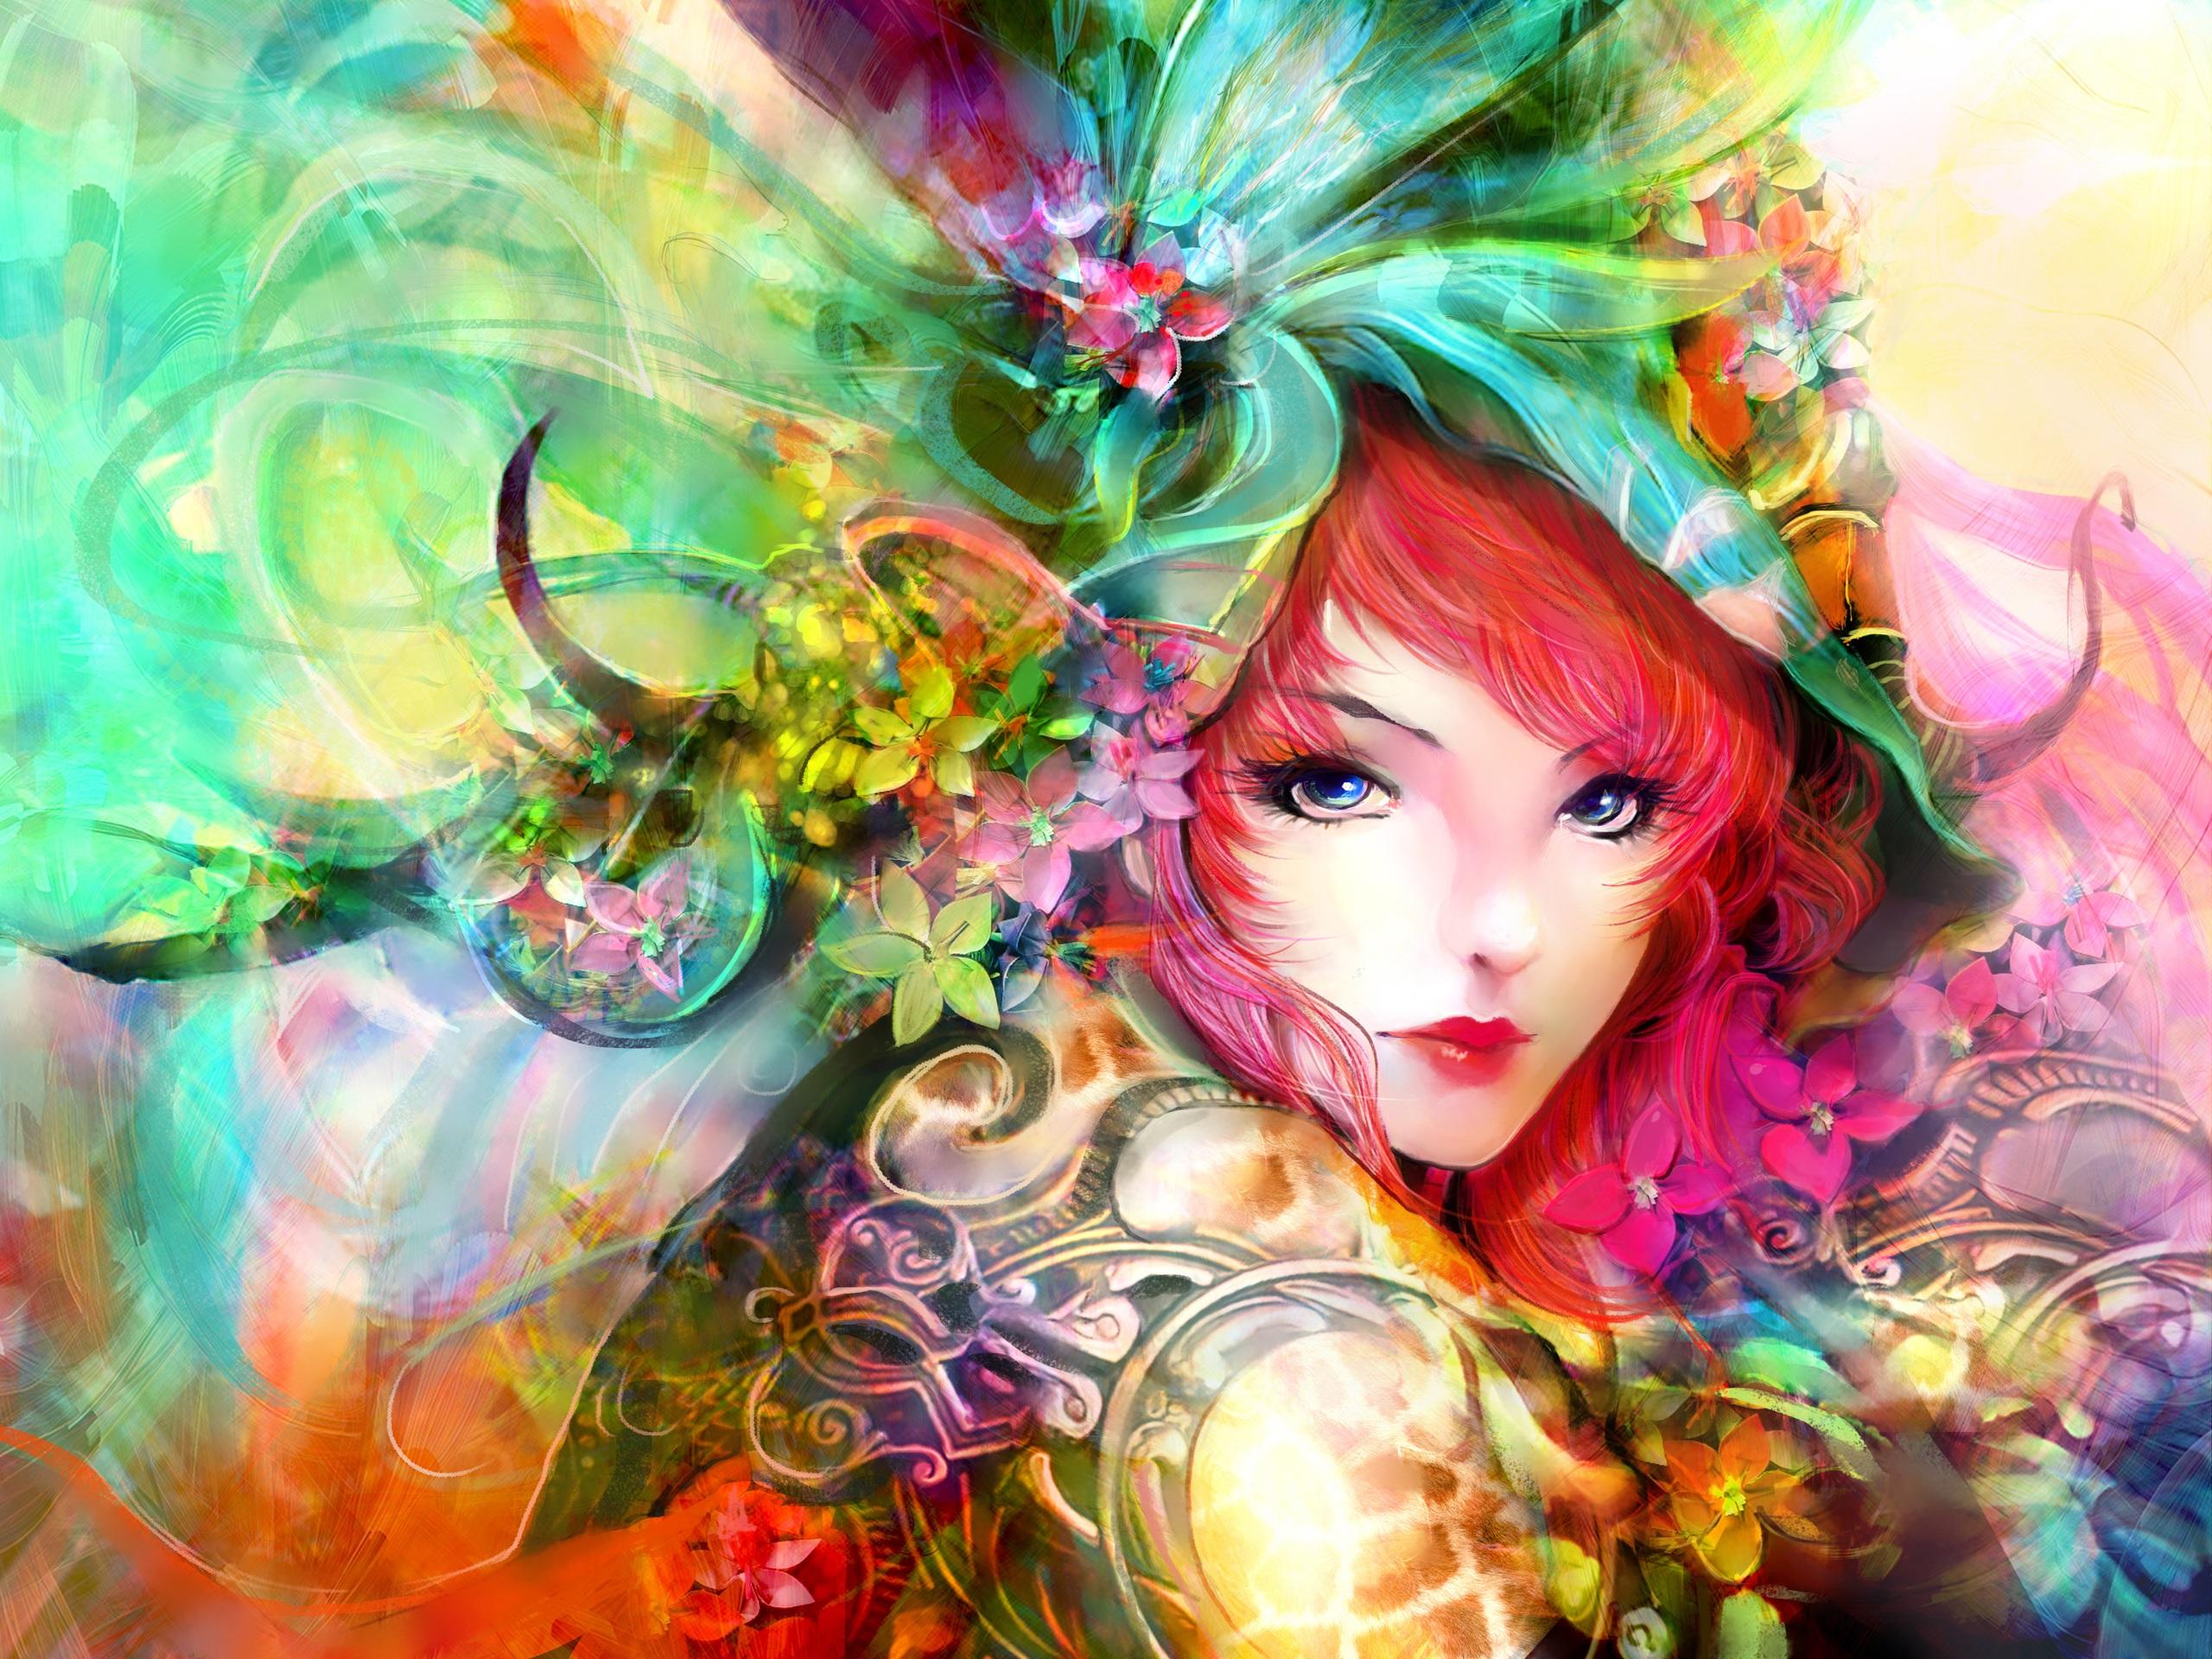 Art painting, girl, eyes, face, flowers, red hair, colorful wallpaper 2560x1920